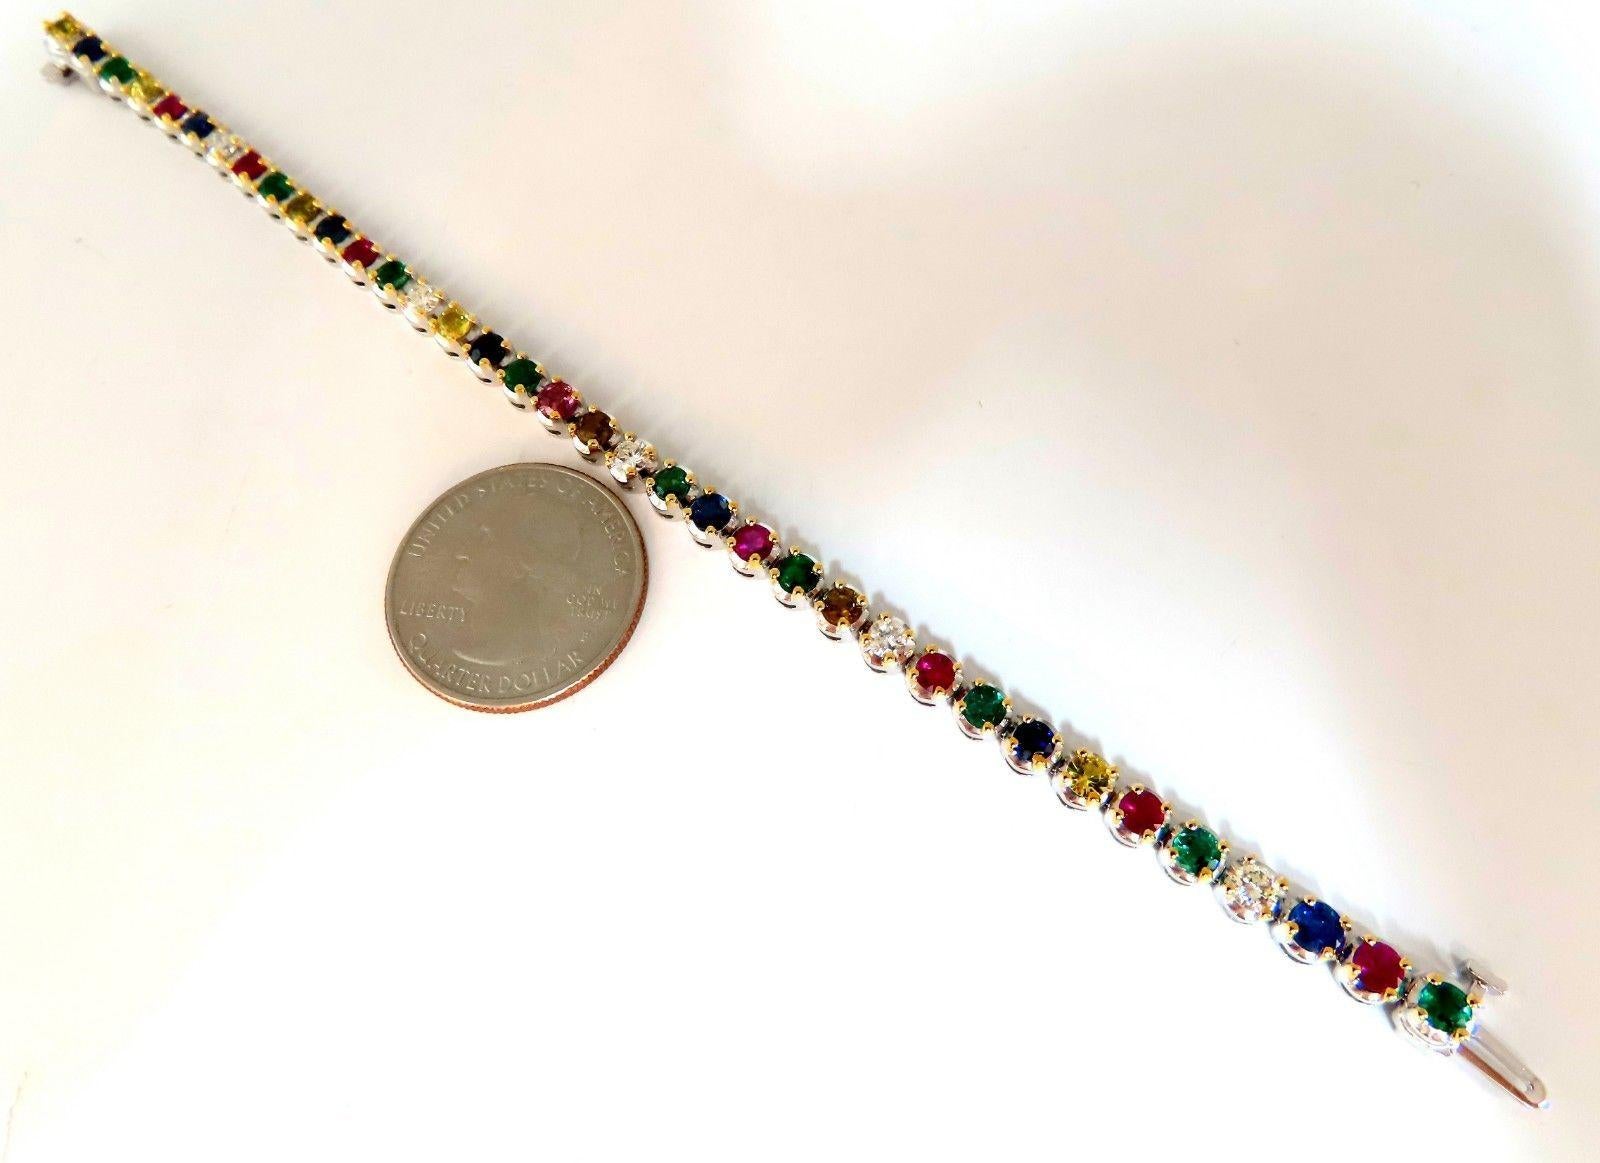 Gem Line.

6.50ct. Natural Sapphires, Ruby, & Emeralds bracelet.

Full round cuts, great sparkle.

Multi-color sapphires.

Vibrant Greens, yellows, Blues & Reds

Clean Clarity & Transparent.

5 Round Diamonds: .86ct

H-color Vs-2 clarity

Secure